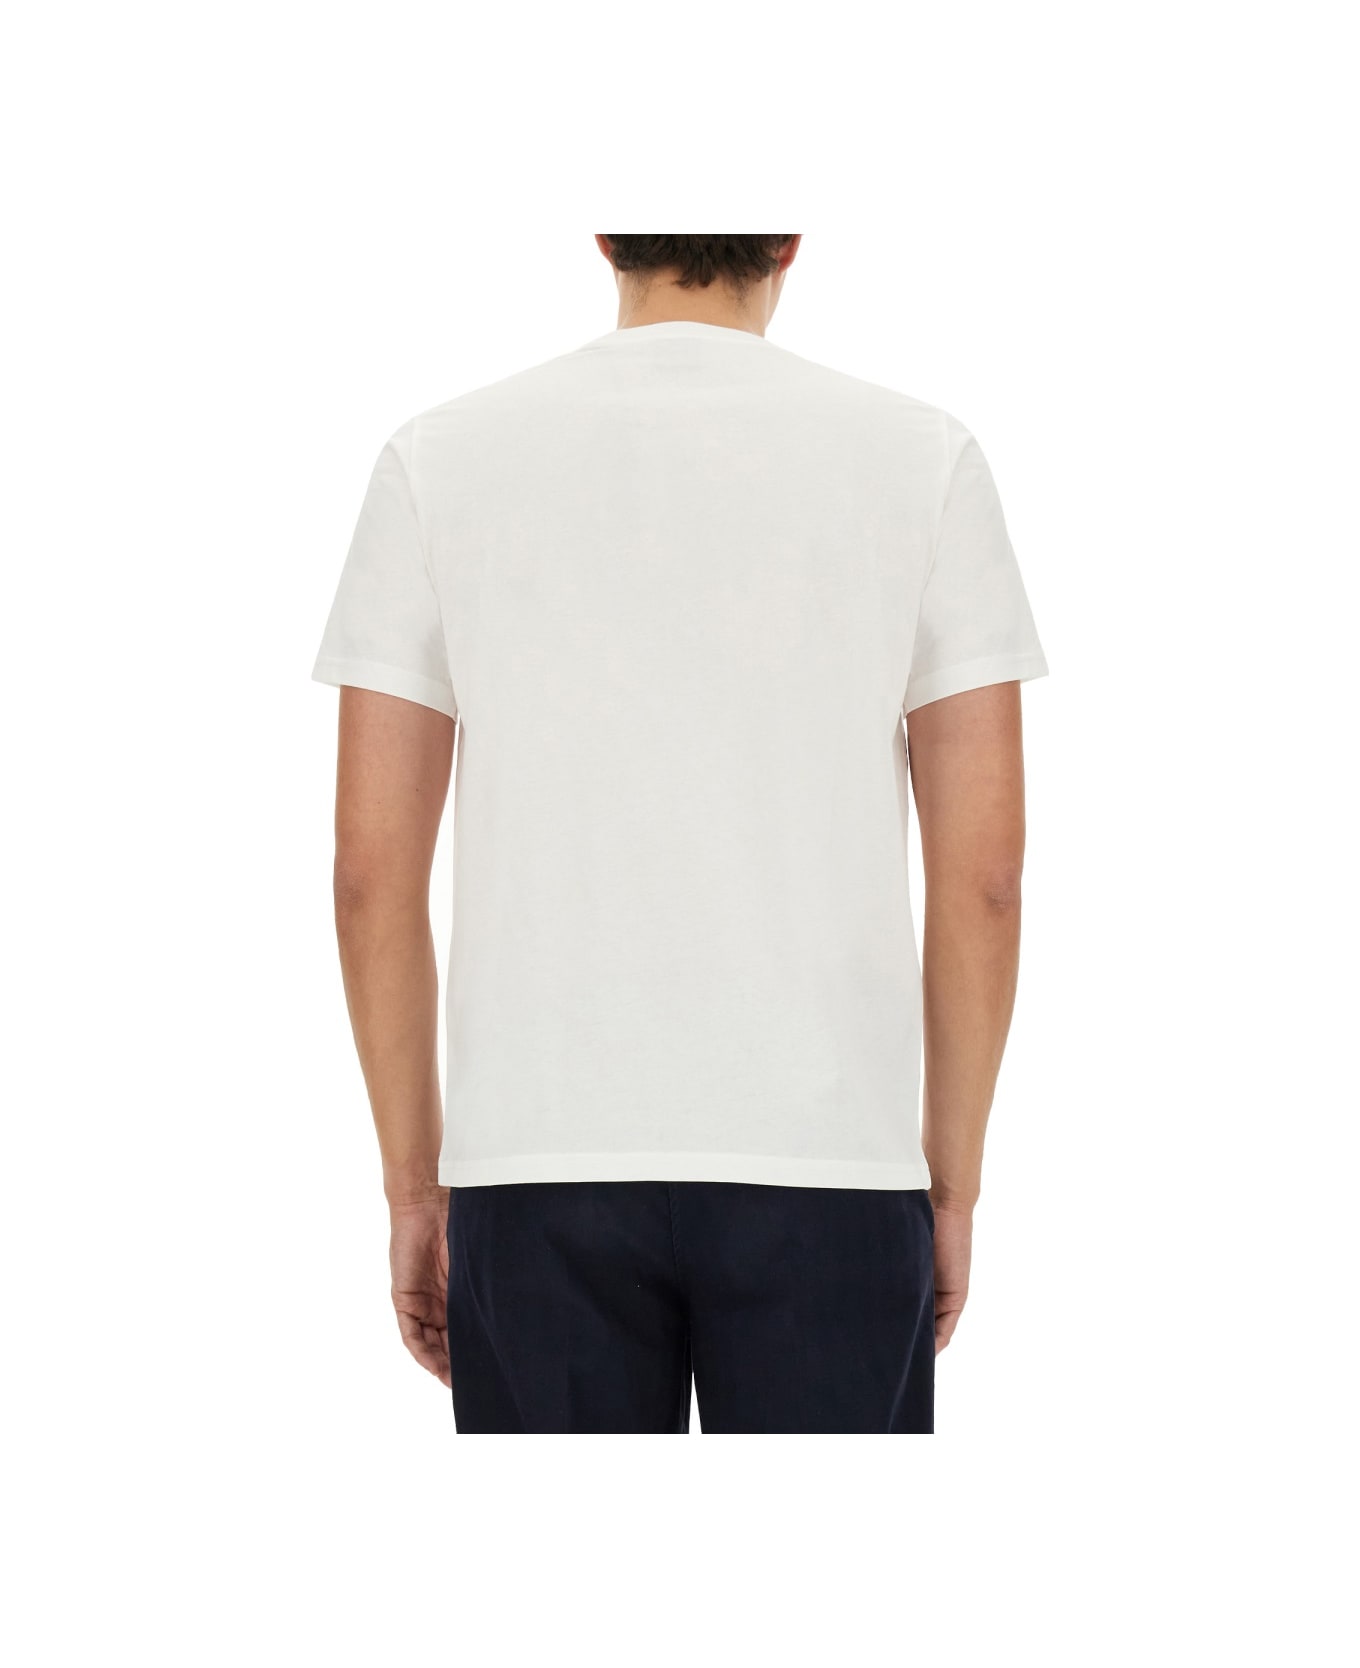 PS by Paul Smith Cyclist Print T-shirt - WHITE シャツ